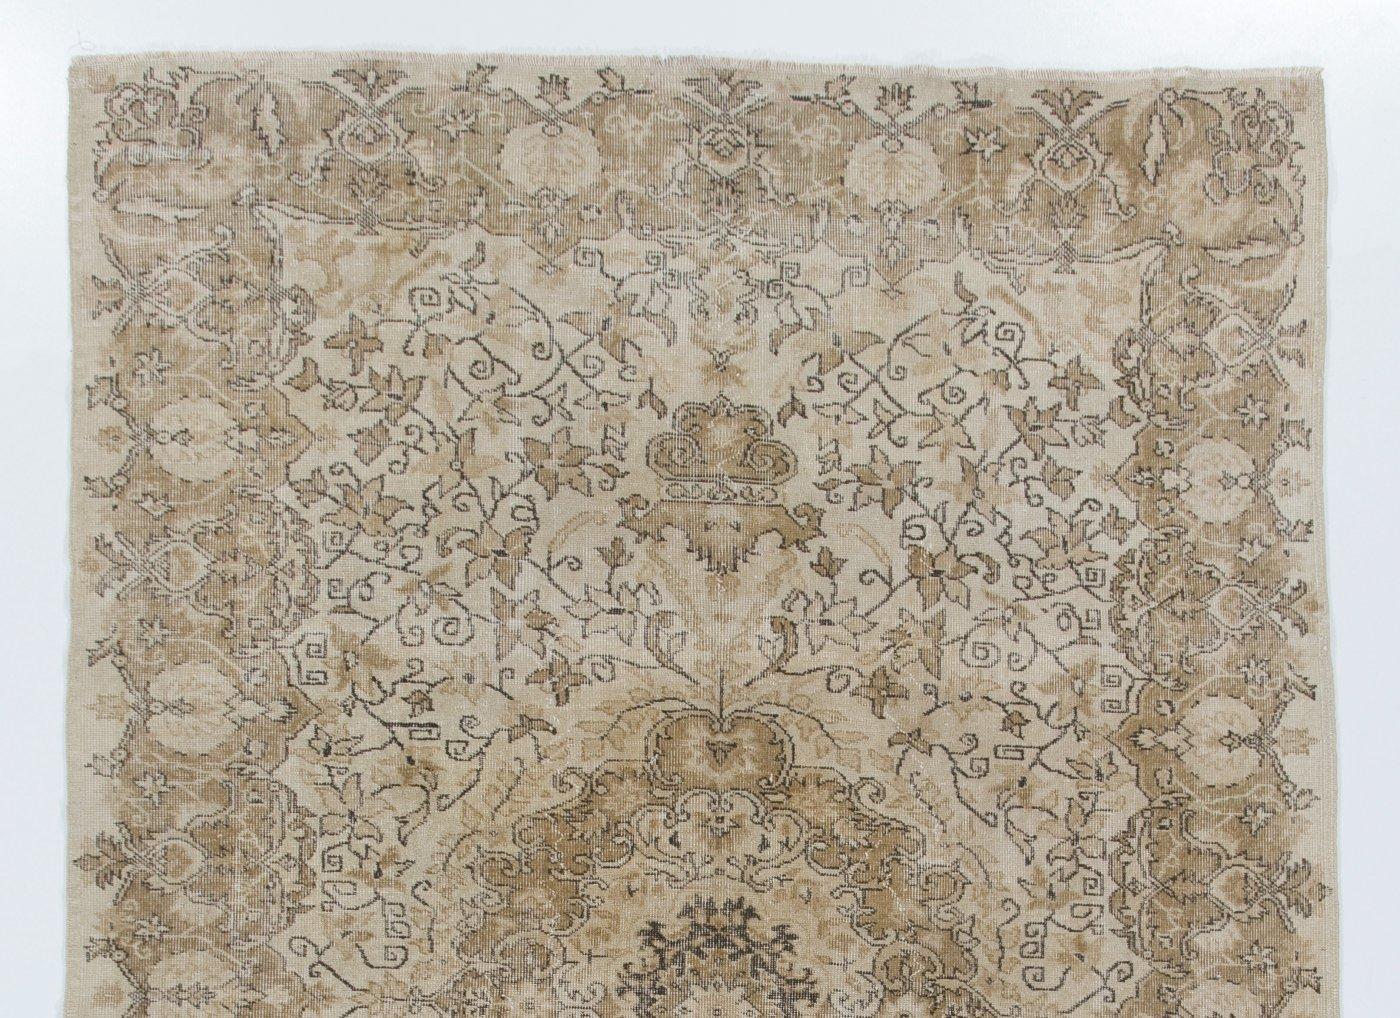 A finely hand-knotted vintage Turkish rug from the 1960s featuring an elegant medallion surrounded all around by lush floral vines and a curvilinear border filled with large rosettes, in beige, khaki and brown. The rug has even low wool pile on